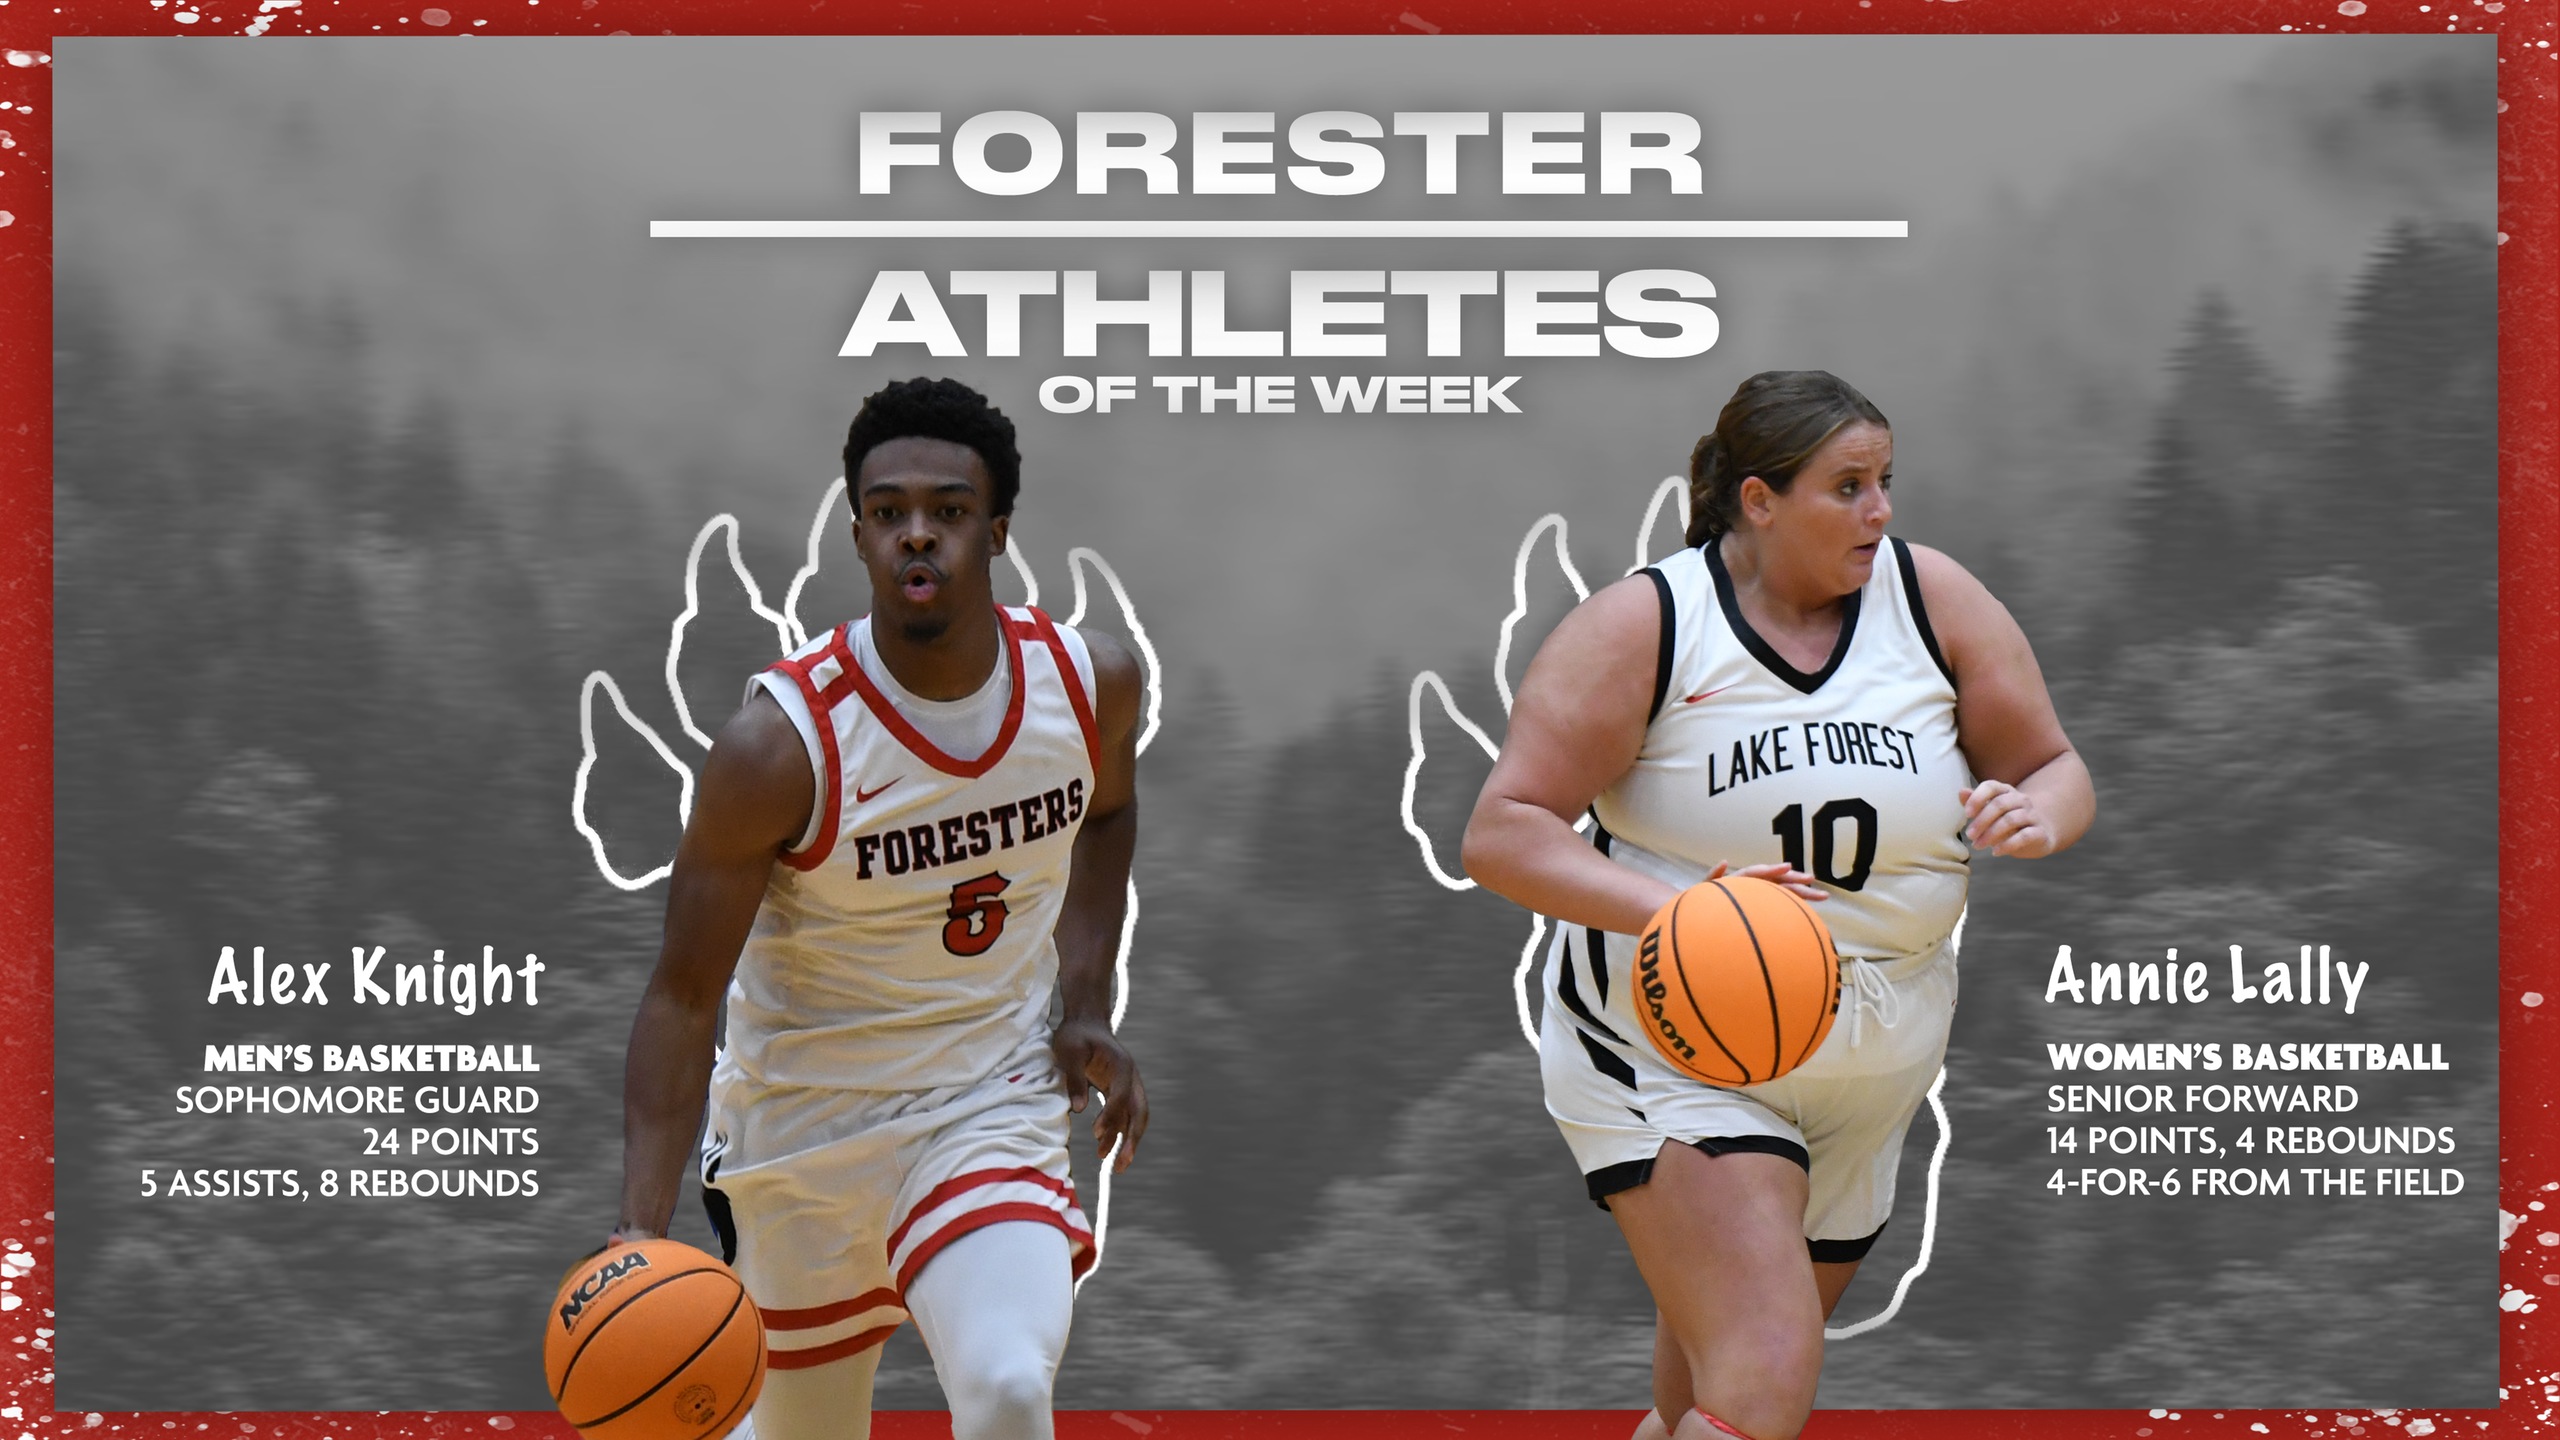 Forester Athletes of the Week: Nov. 29